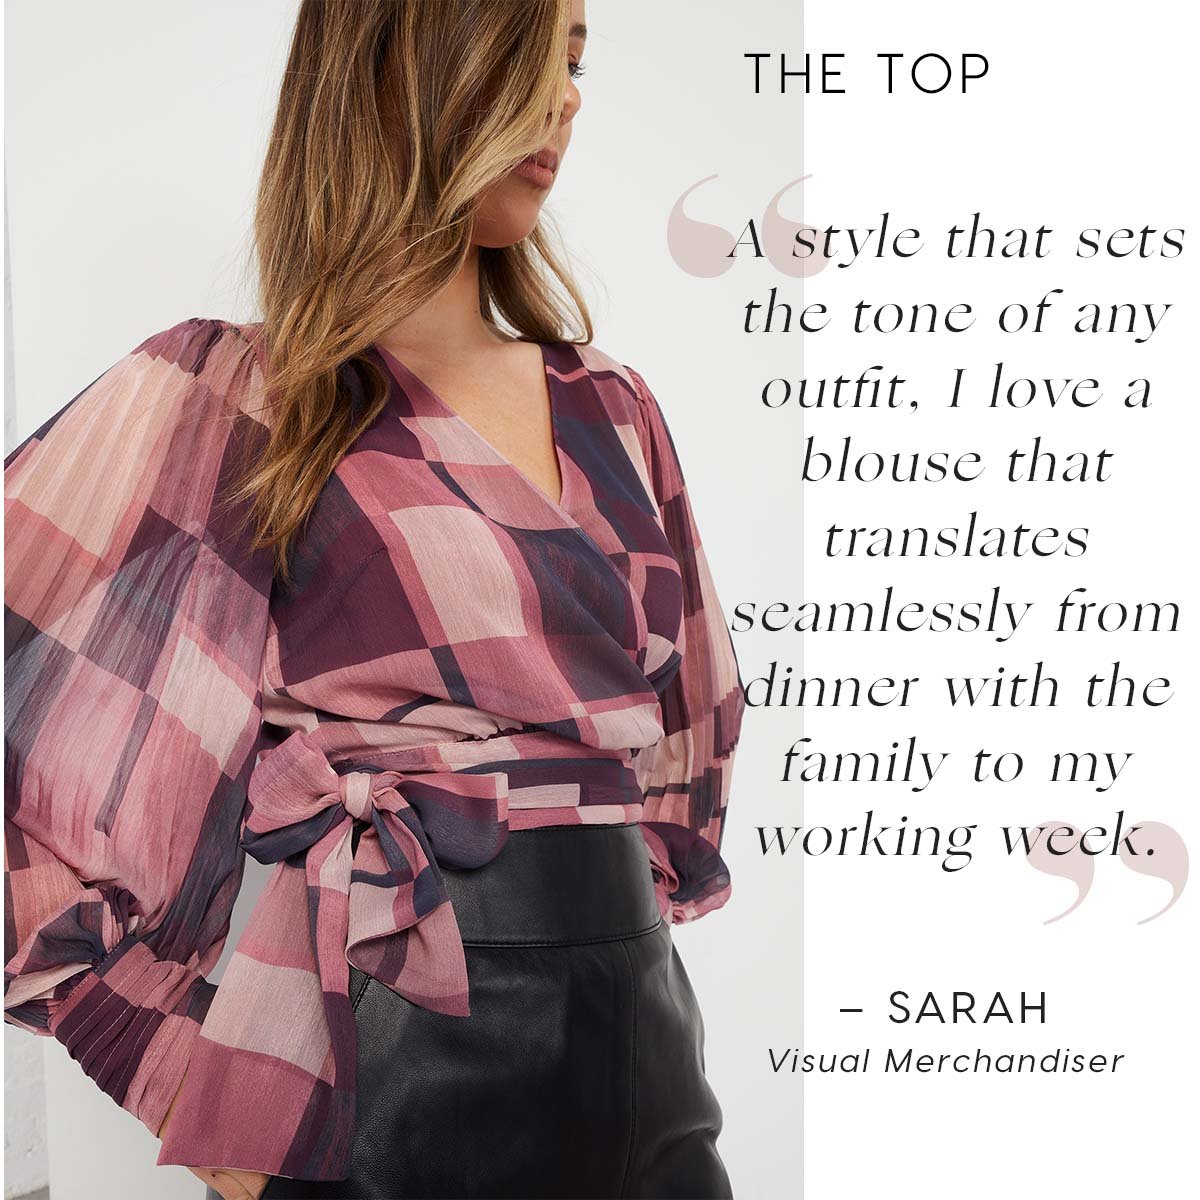 The Top. A style that sets the tone of any outfit, I love a blouse that translates seamlessly from dinner with the family to my working week.